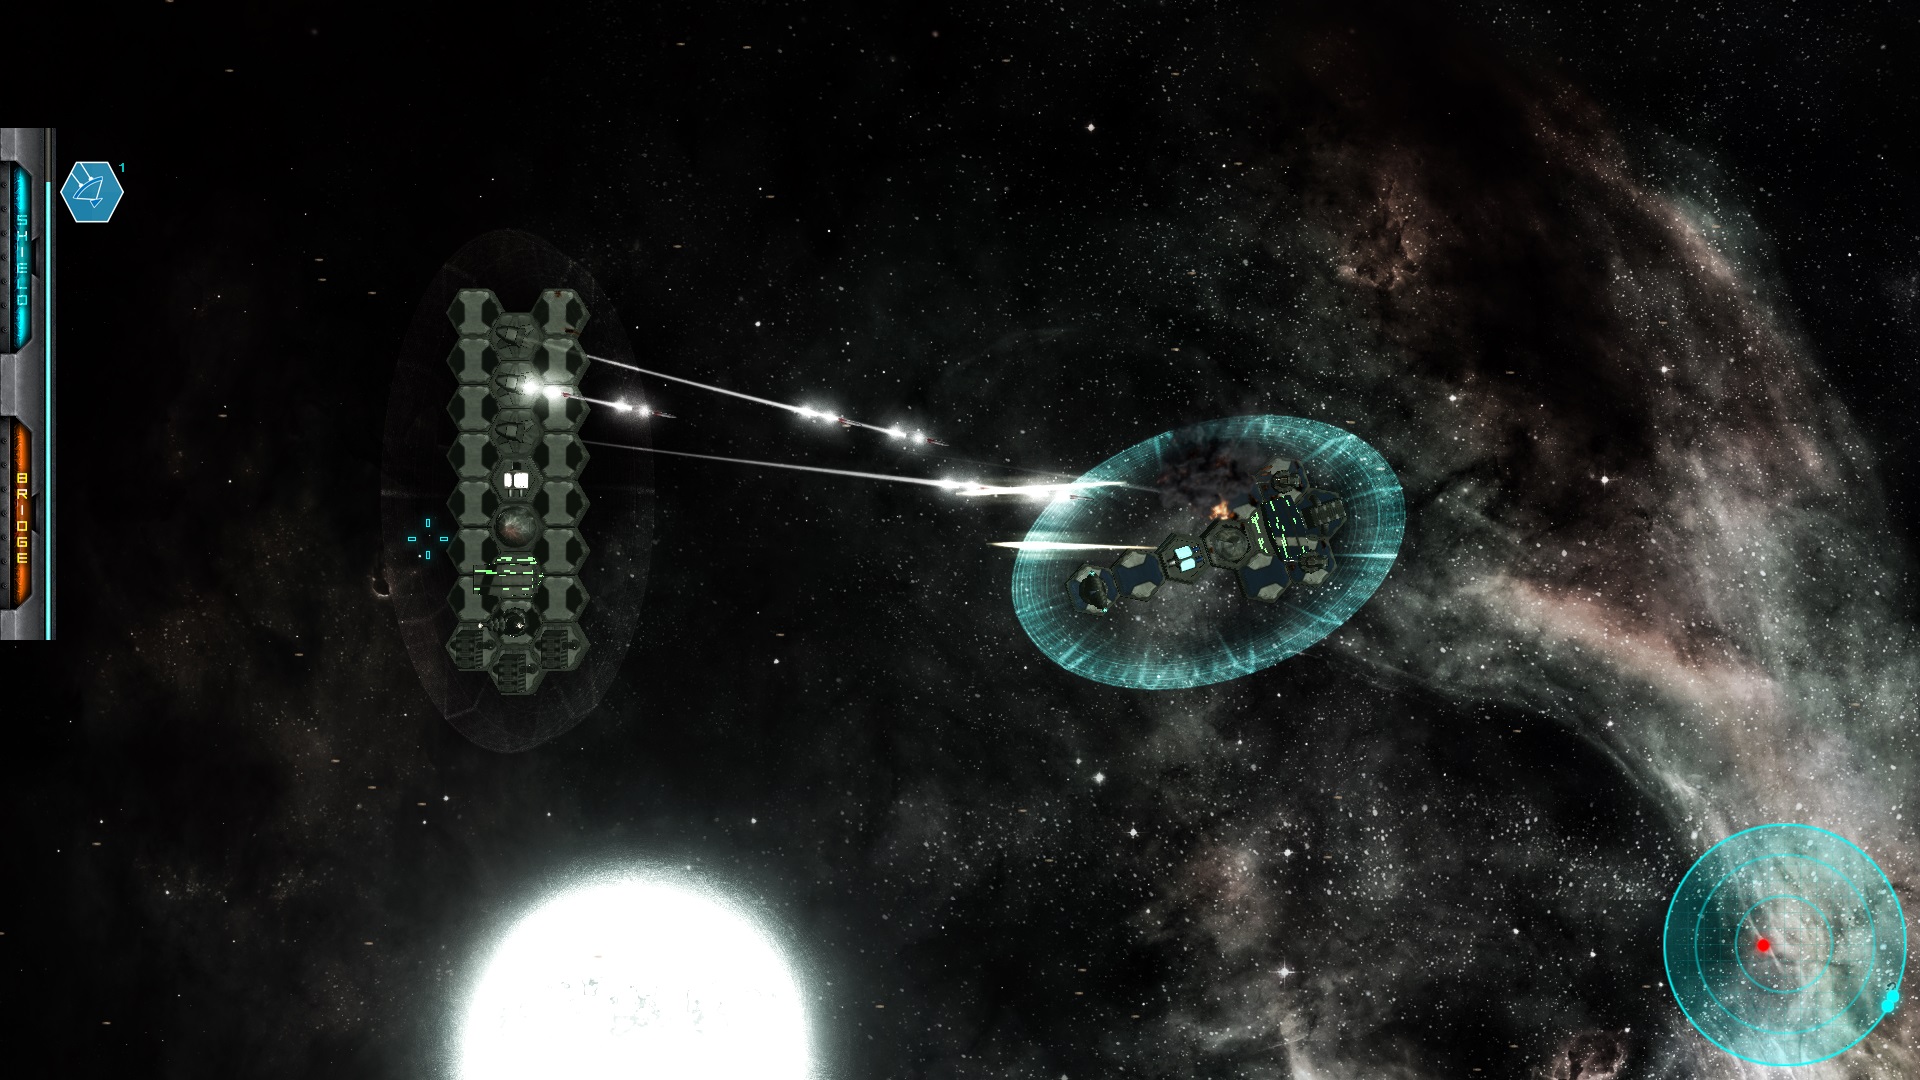 Missiles now get through shields, so a missile interceptor might be a good choice.